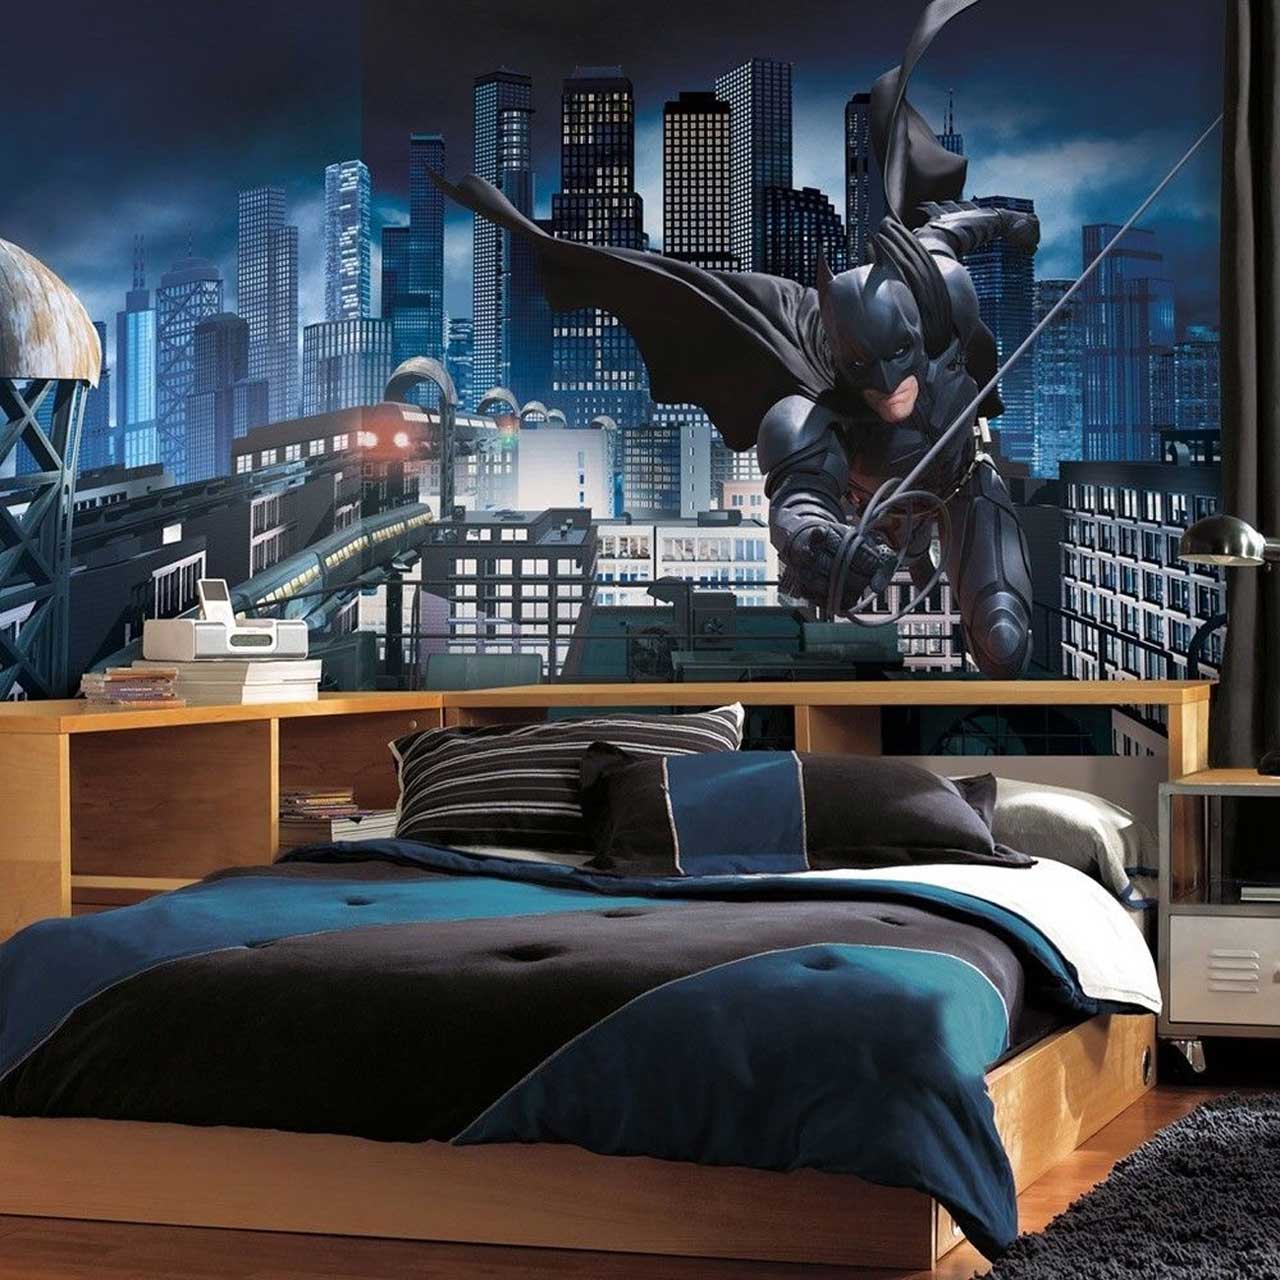 Room Decor Designs Kids Room Decor For Boys Designs Ideas With Stylish Wood Bed Kids Room Design Also Cool Batman Wall Art Canvas Kids Room Ideas Plus Interesting Bookcase Ideas Decoration Kids Desire And Kids Room Decor